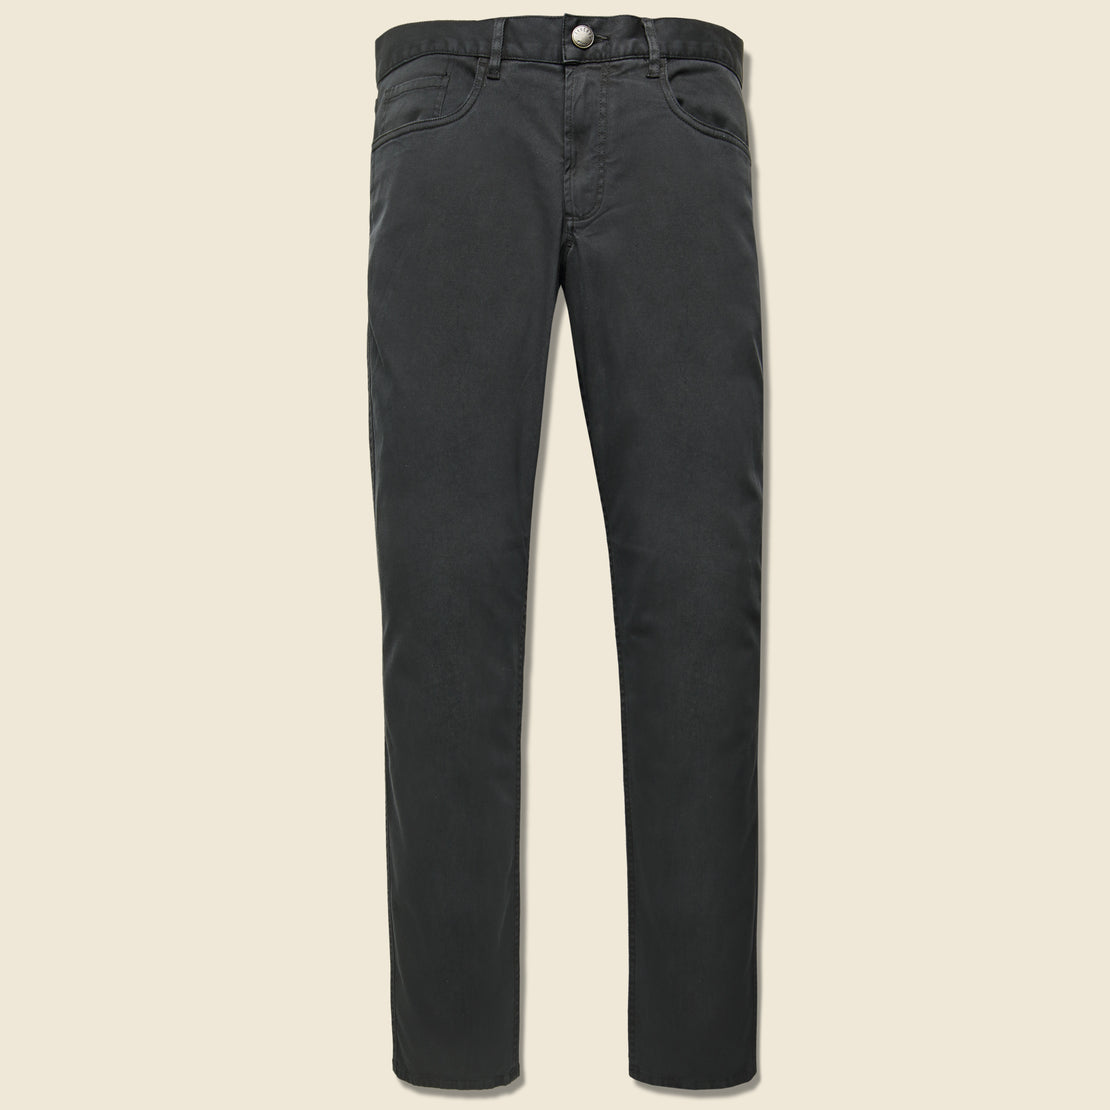 Faherty Comfort Twill Jean - Washed Black